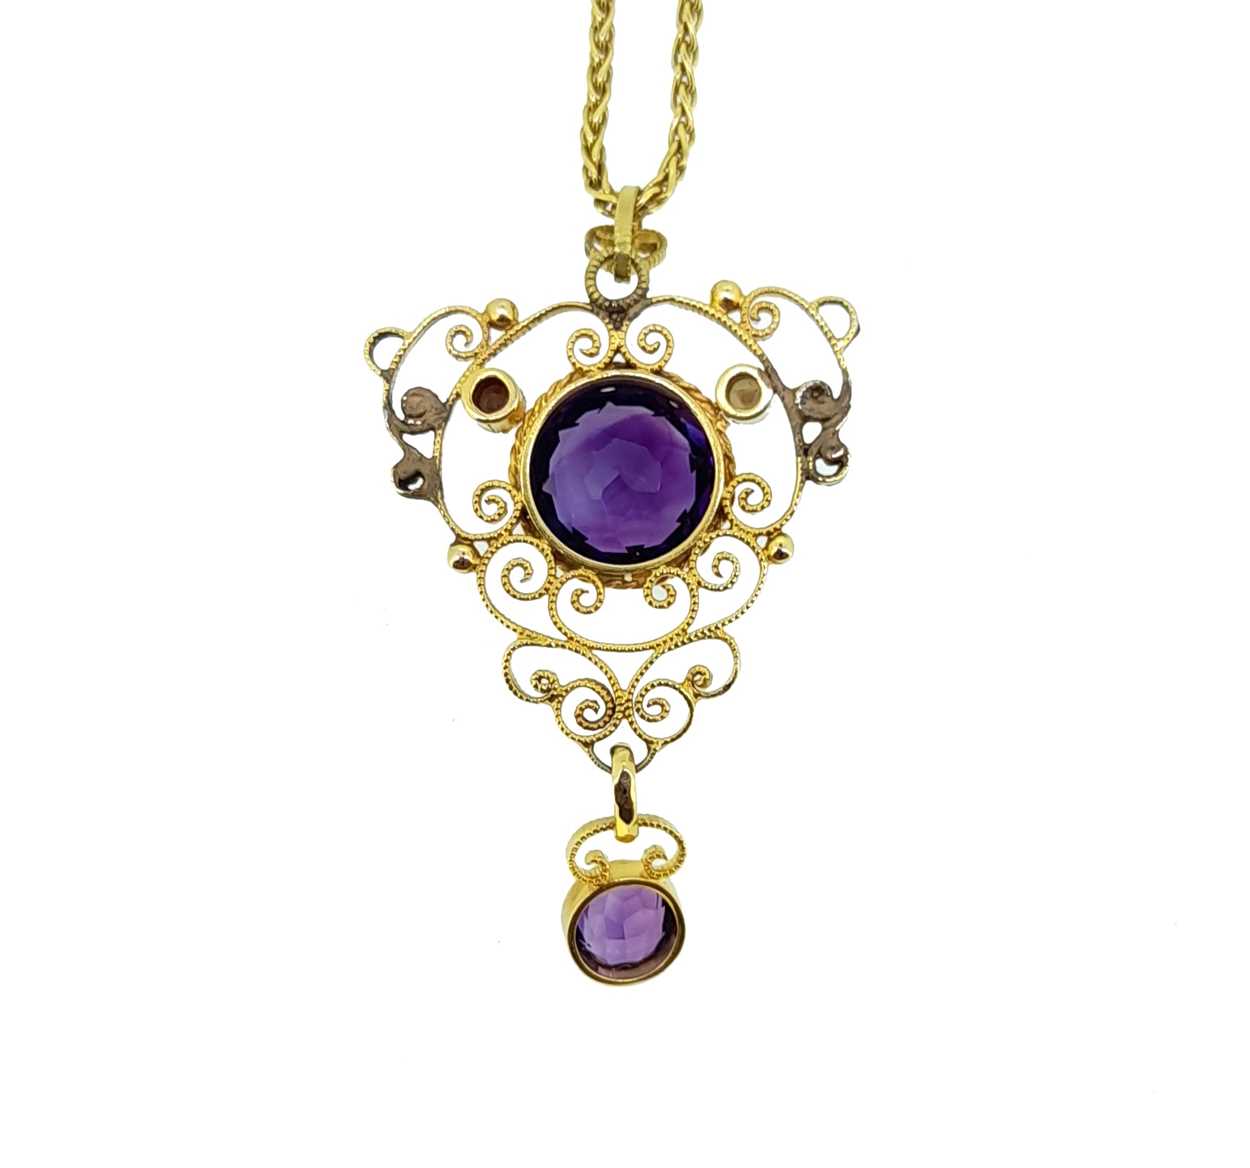 An amethyst pendant and chain, - Image 3 of 4